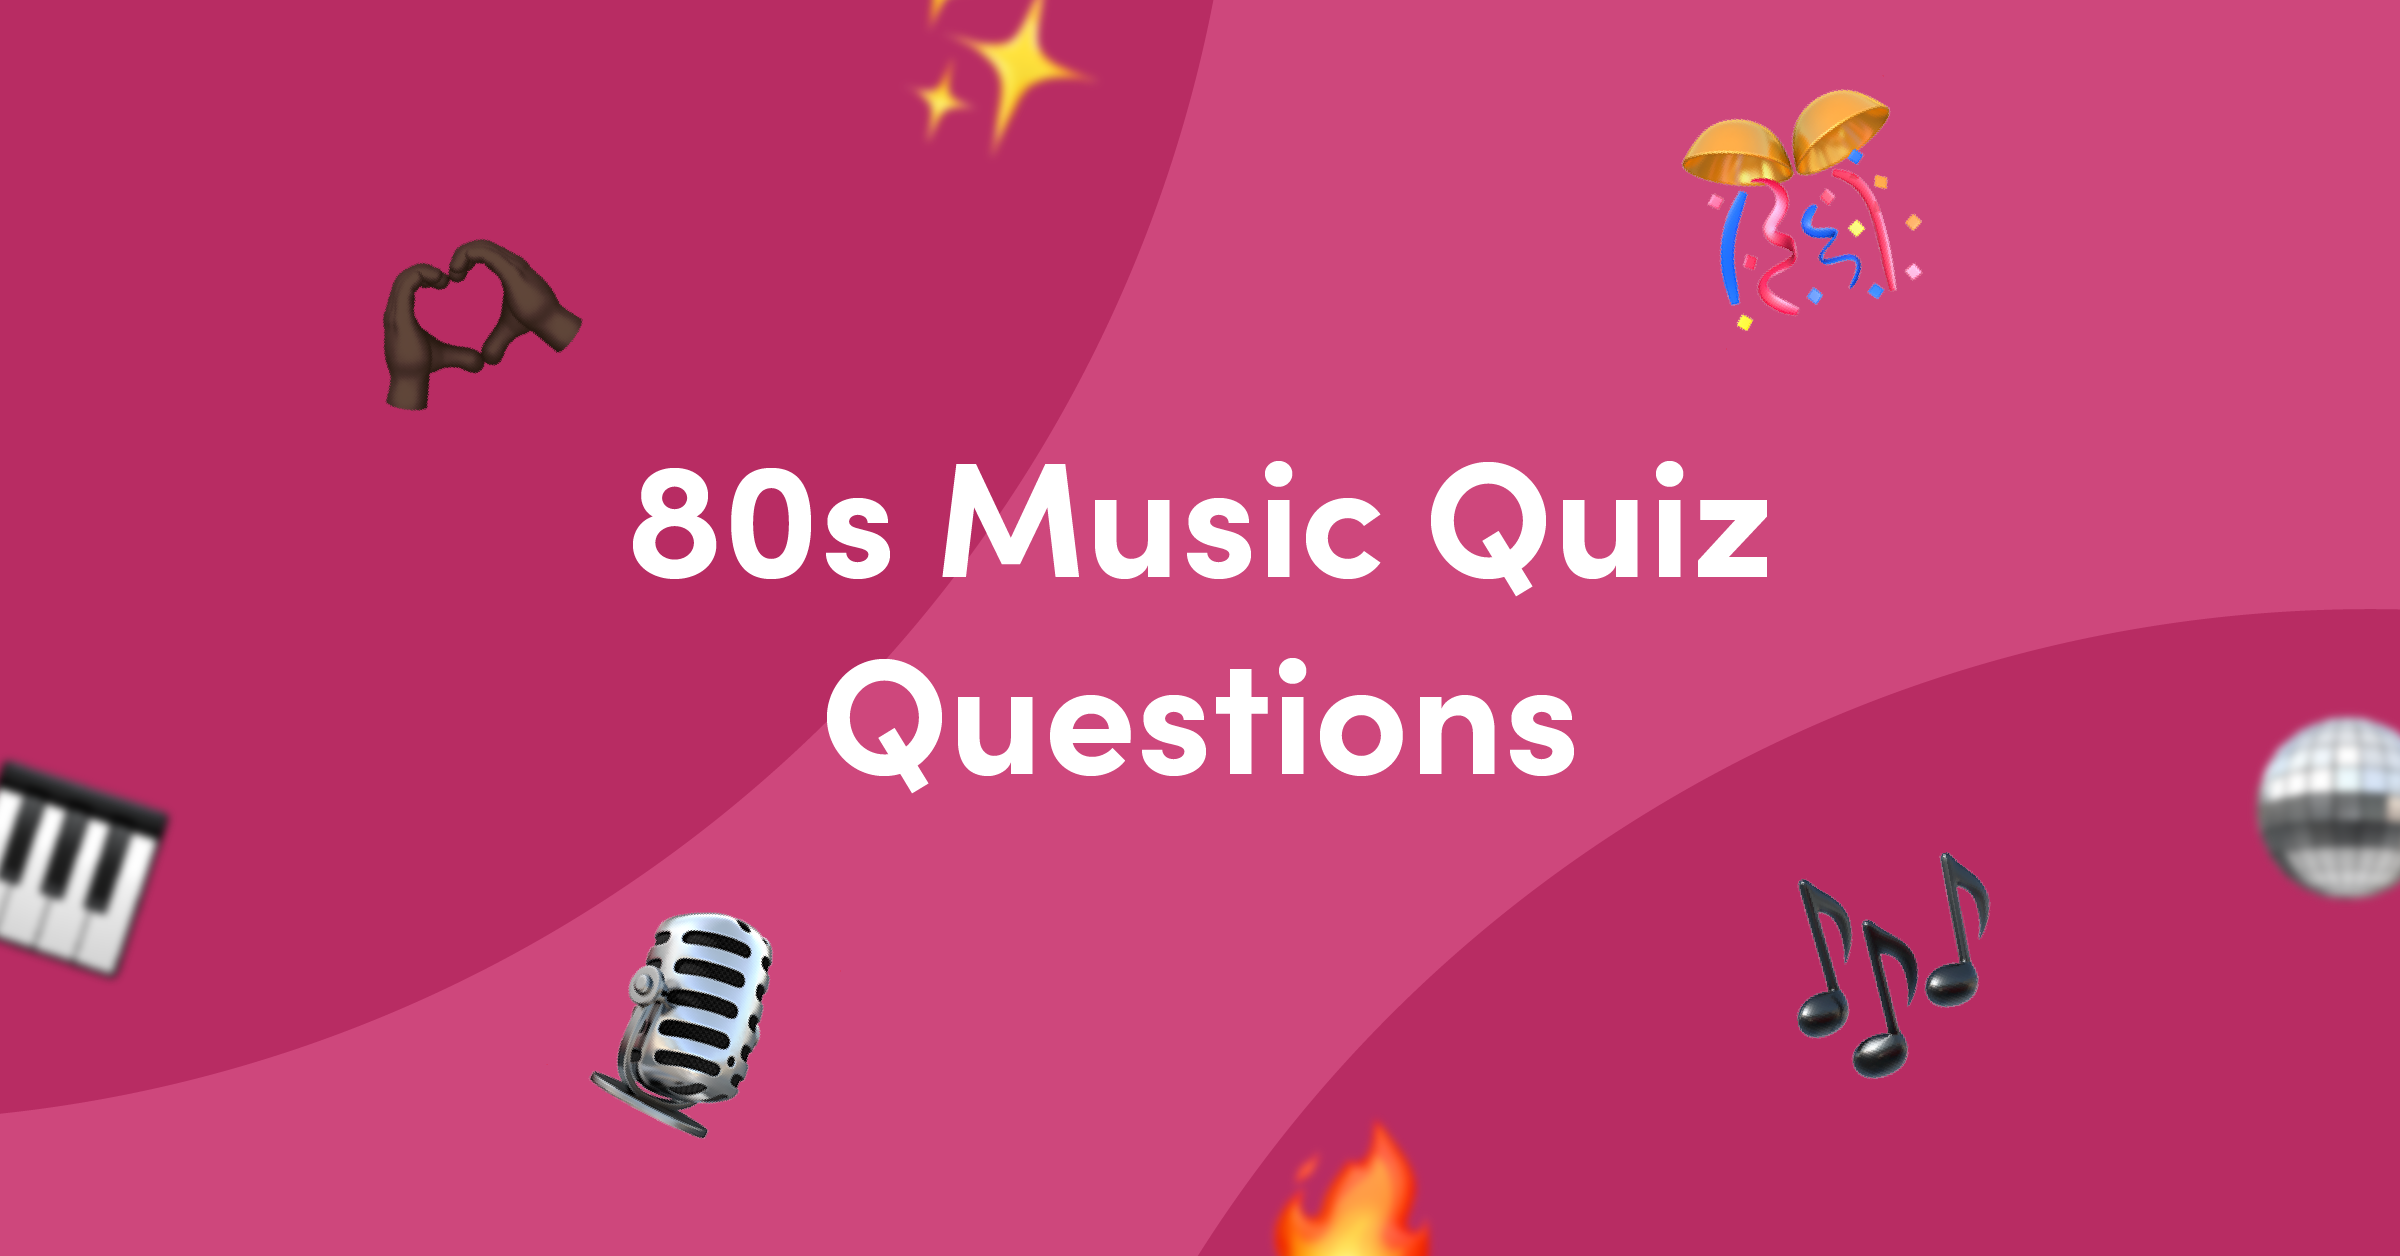 Pink background for 80s music quiz questions and answers